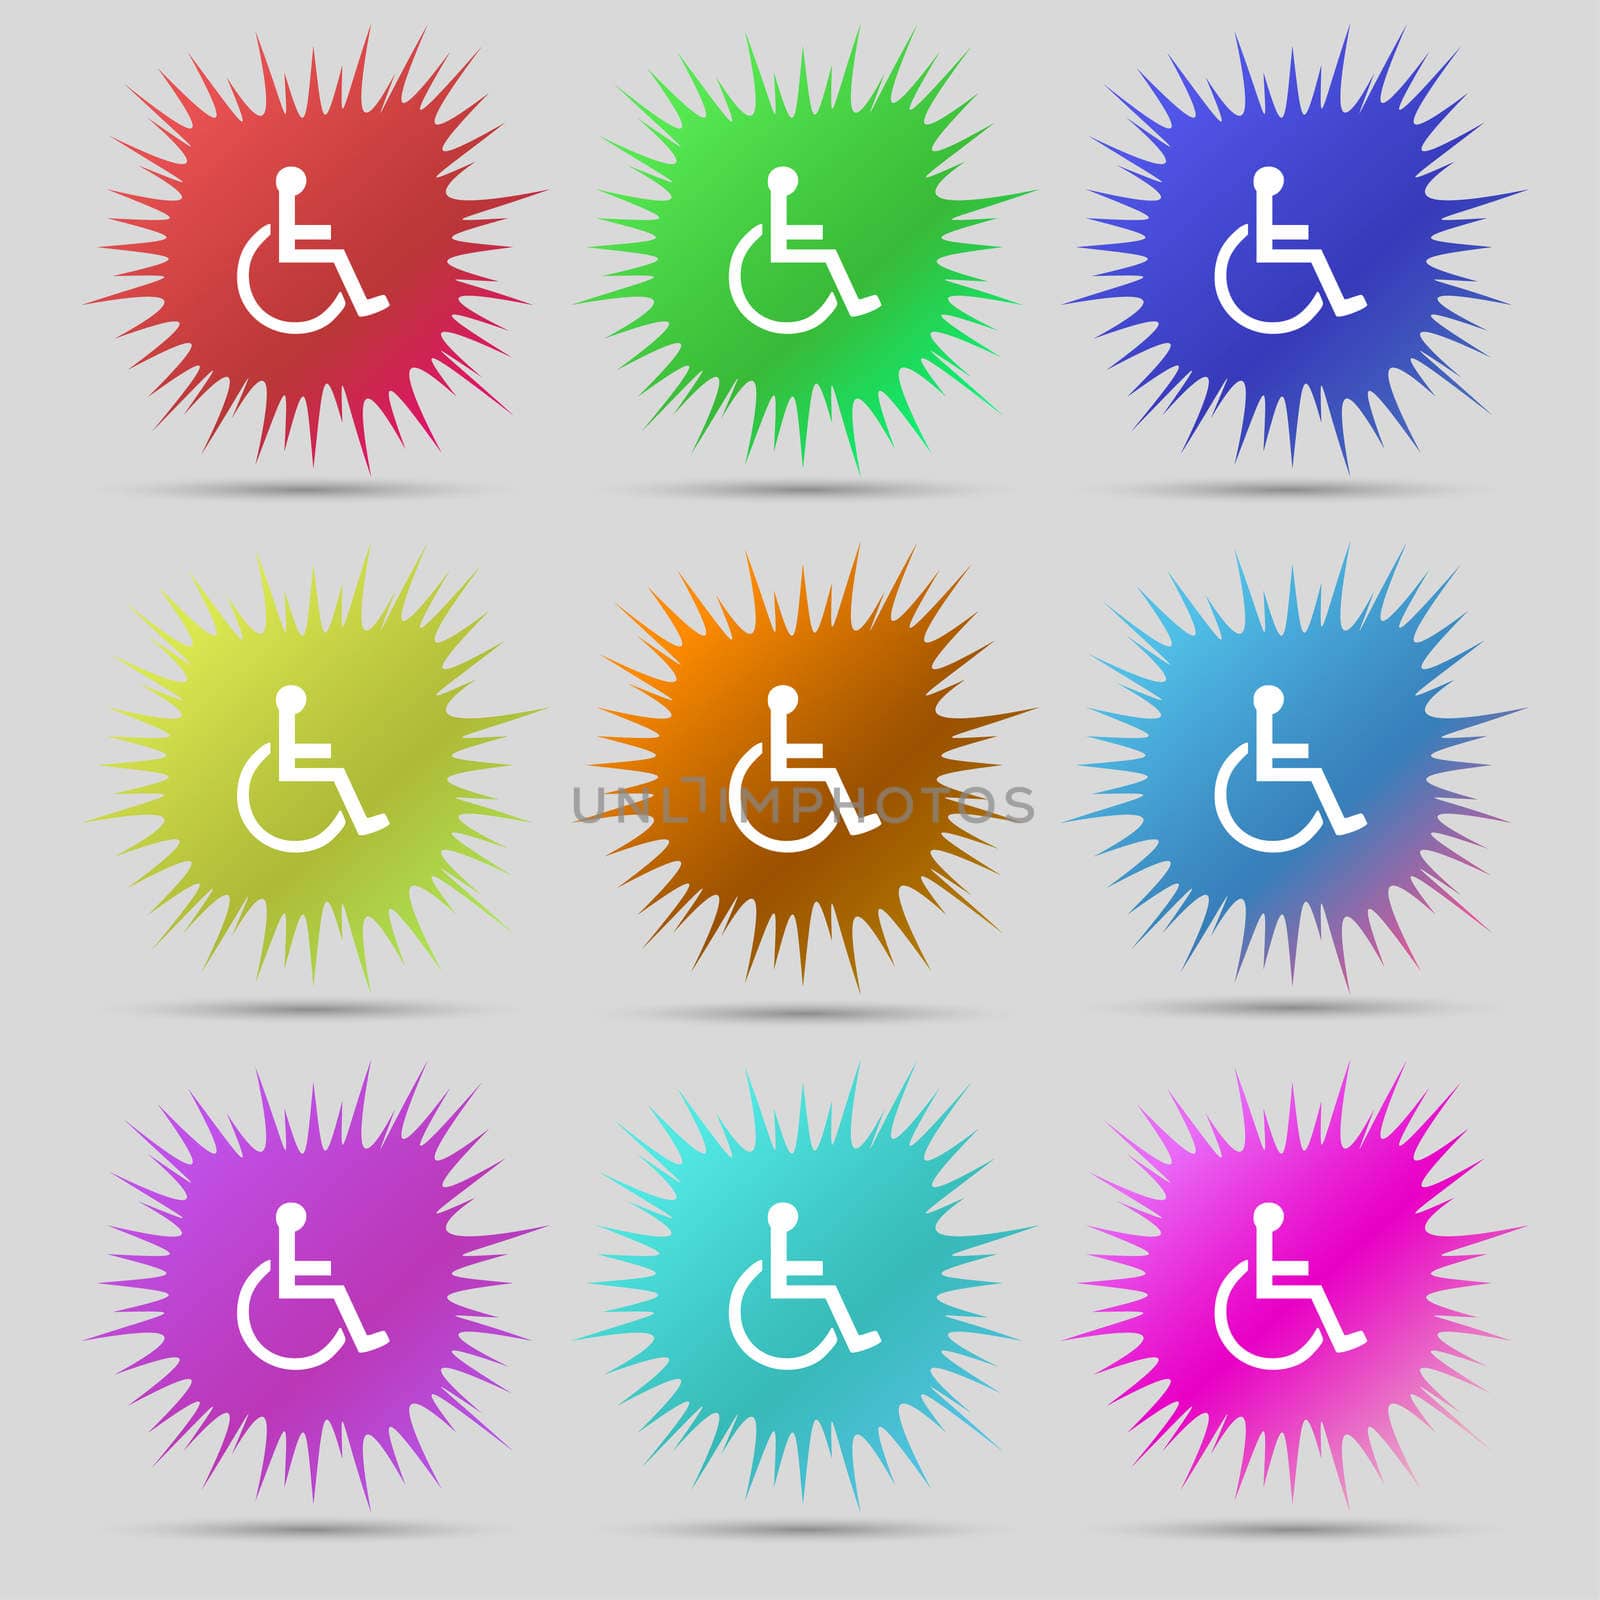 disabled icon sign. A set of nine original needle buttons. illustration